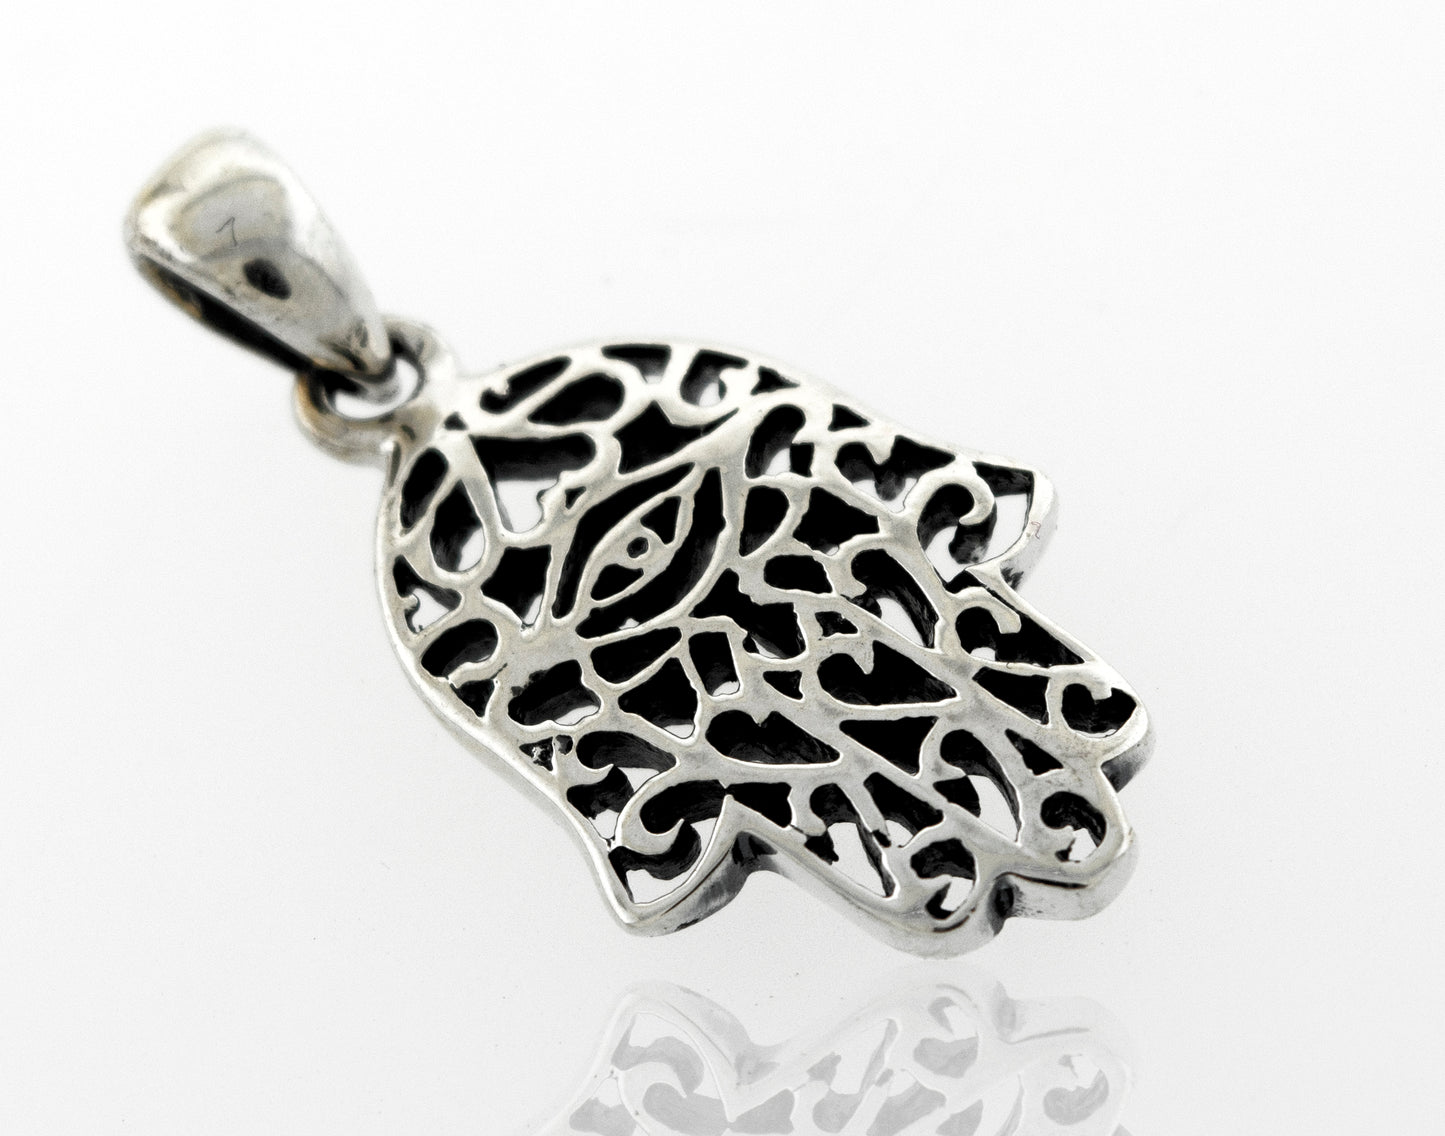 Super Silver's Hamsa Hand Pendant features a freestyle swirl design in sterling silver.